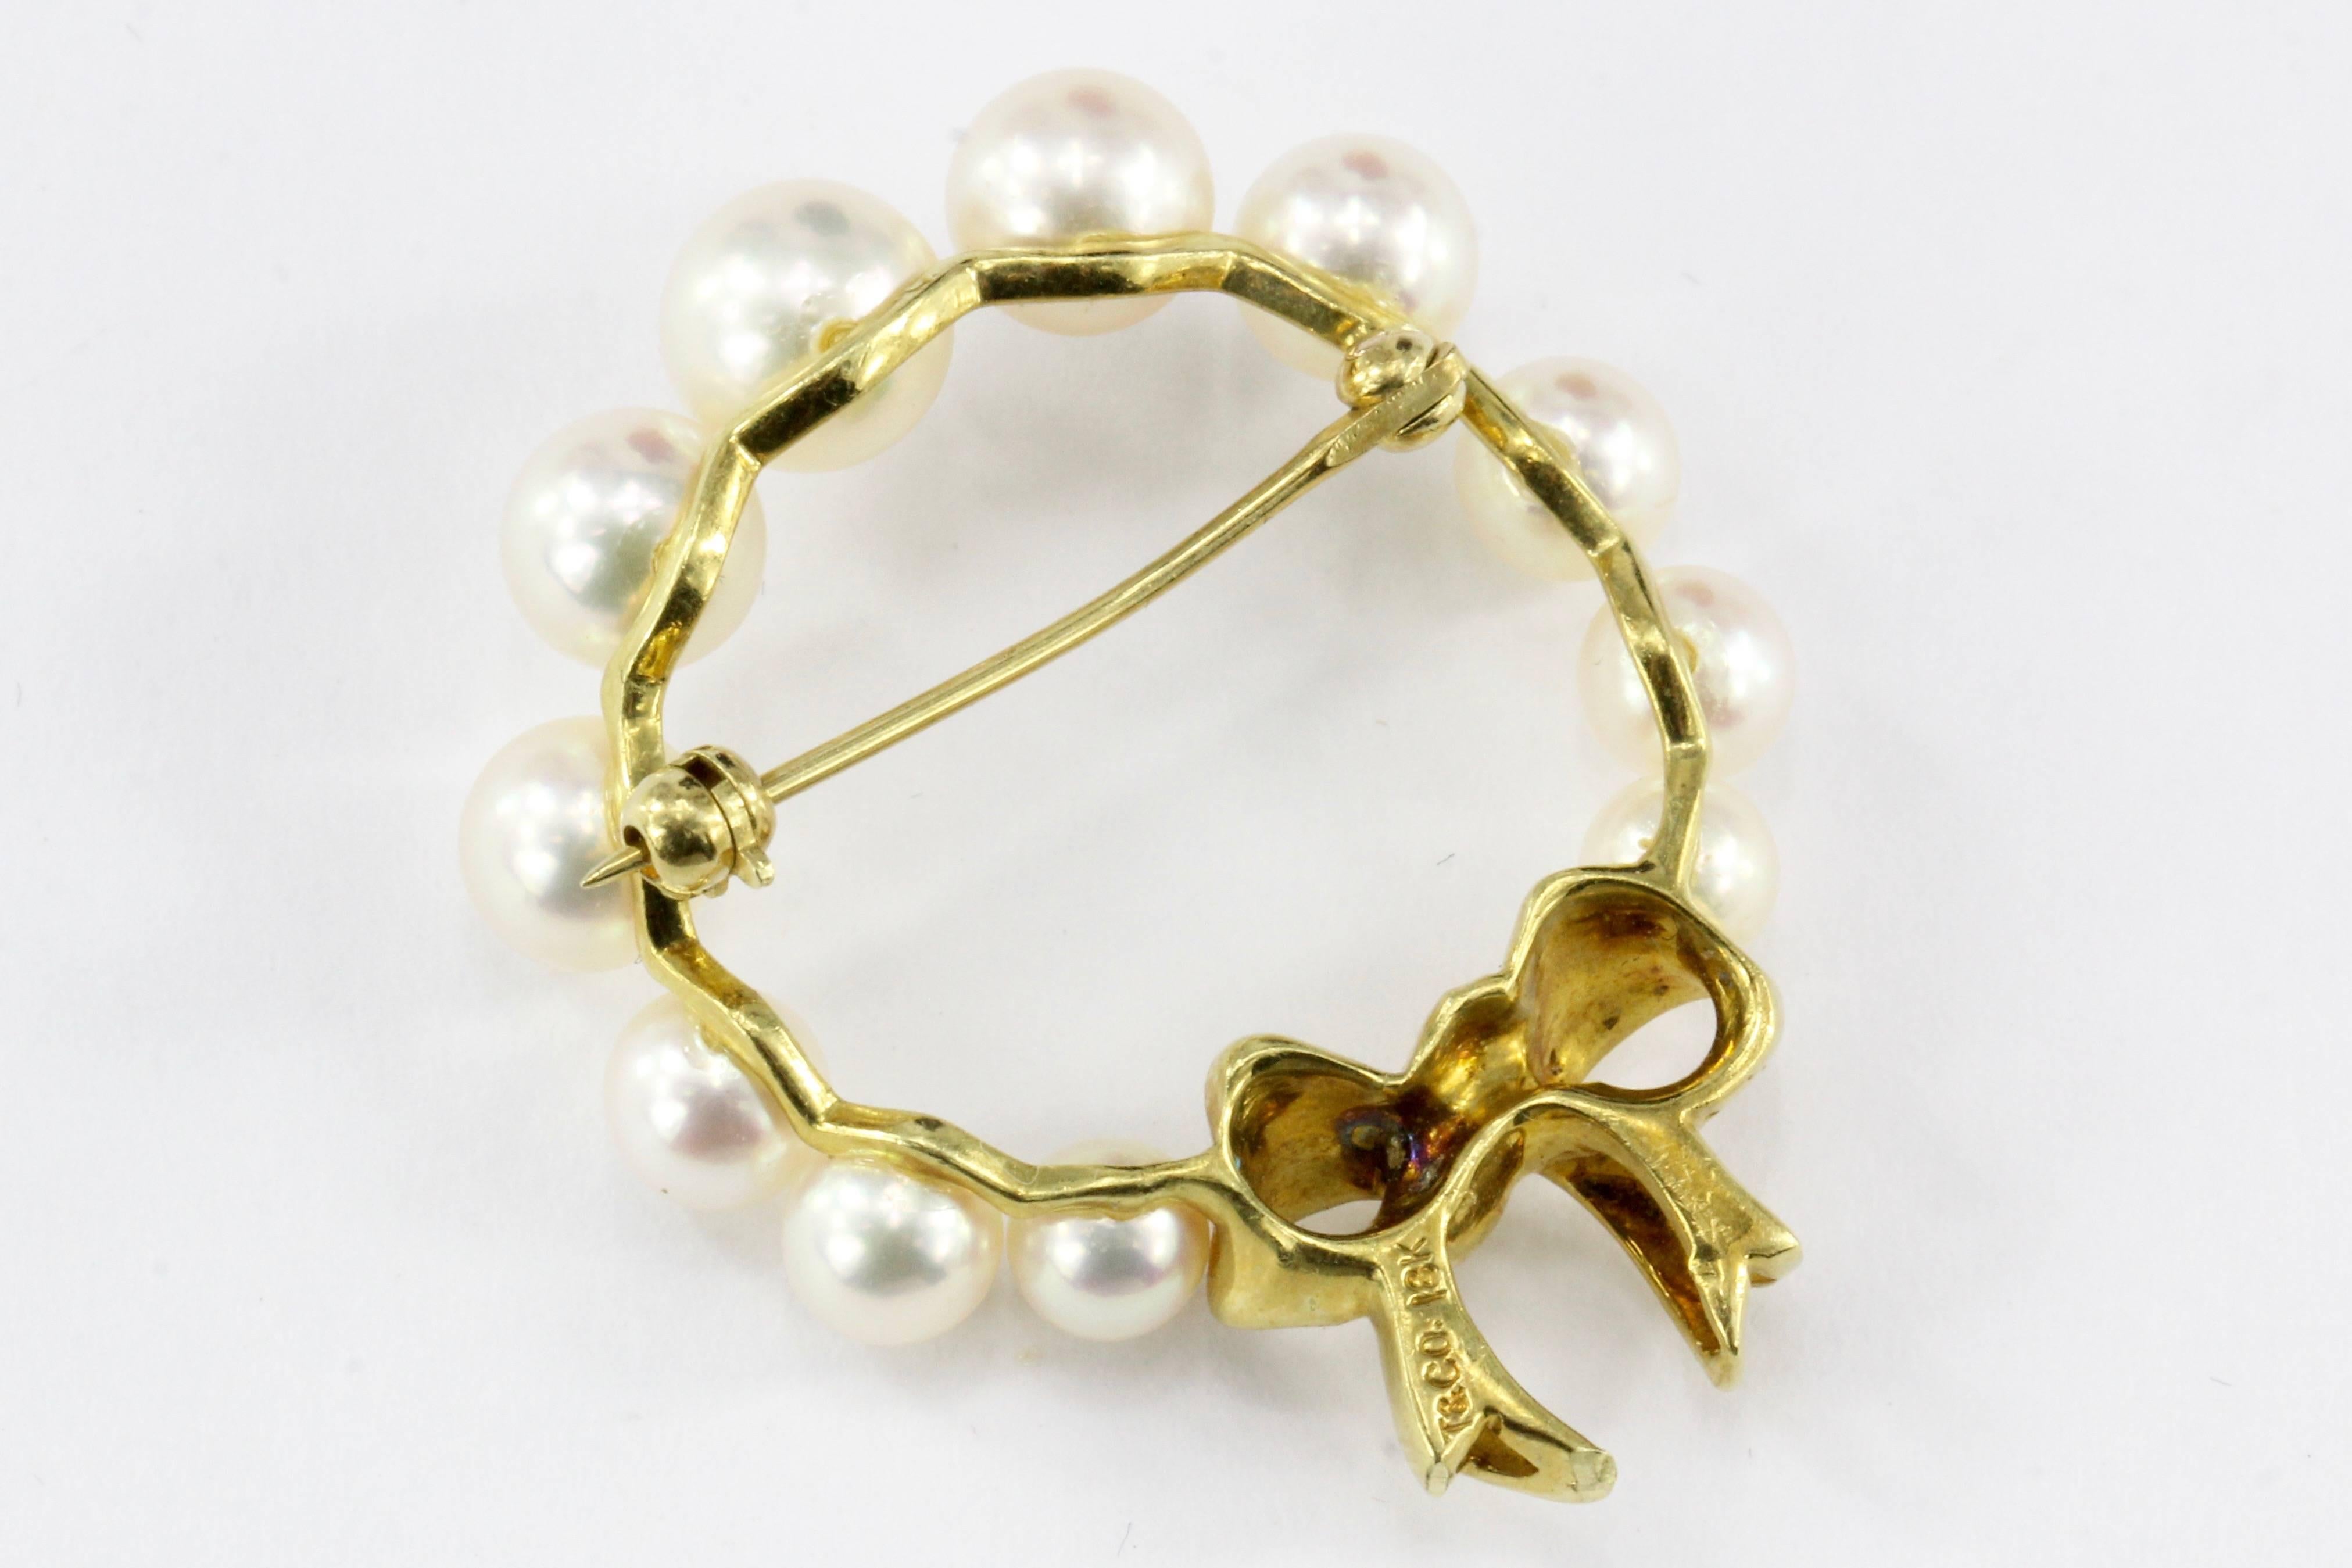 Era: Vintage

Hallmarks: T & Co 18K

Composition: 18K Yellow Gold

Primary Stone: Pearl

Brooch Measurement: 1.25